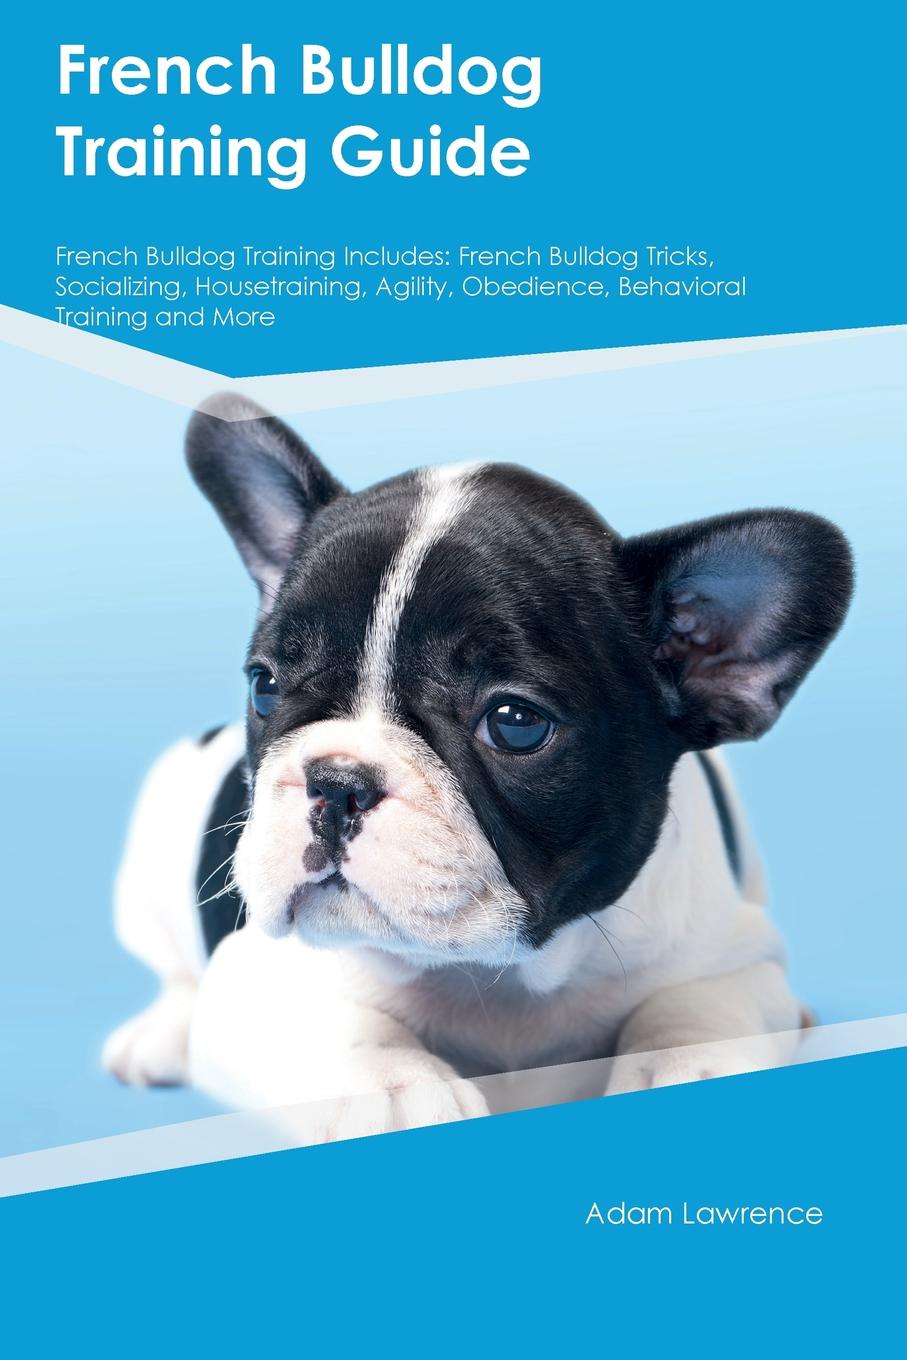 French Bulldog Training Guide French Bulldog Training Includes. French Bulldog Tricks, Socializing, Housetraining, Agility, Obedience, Behavioral Training and More